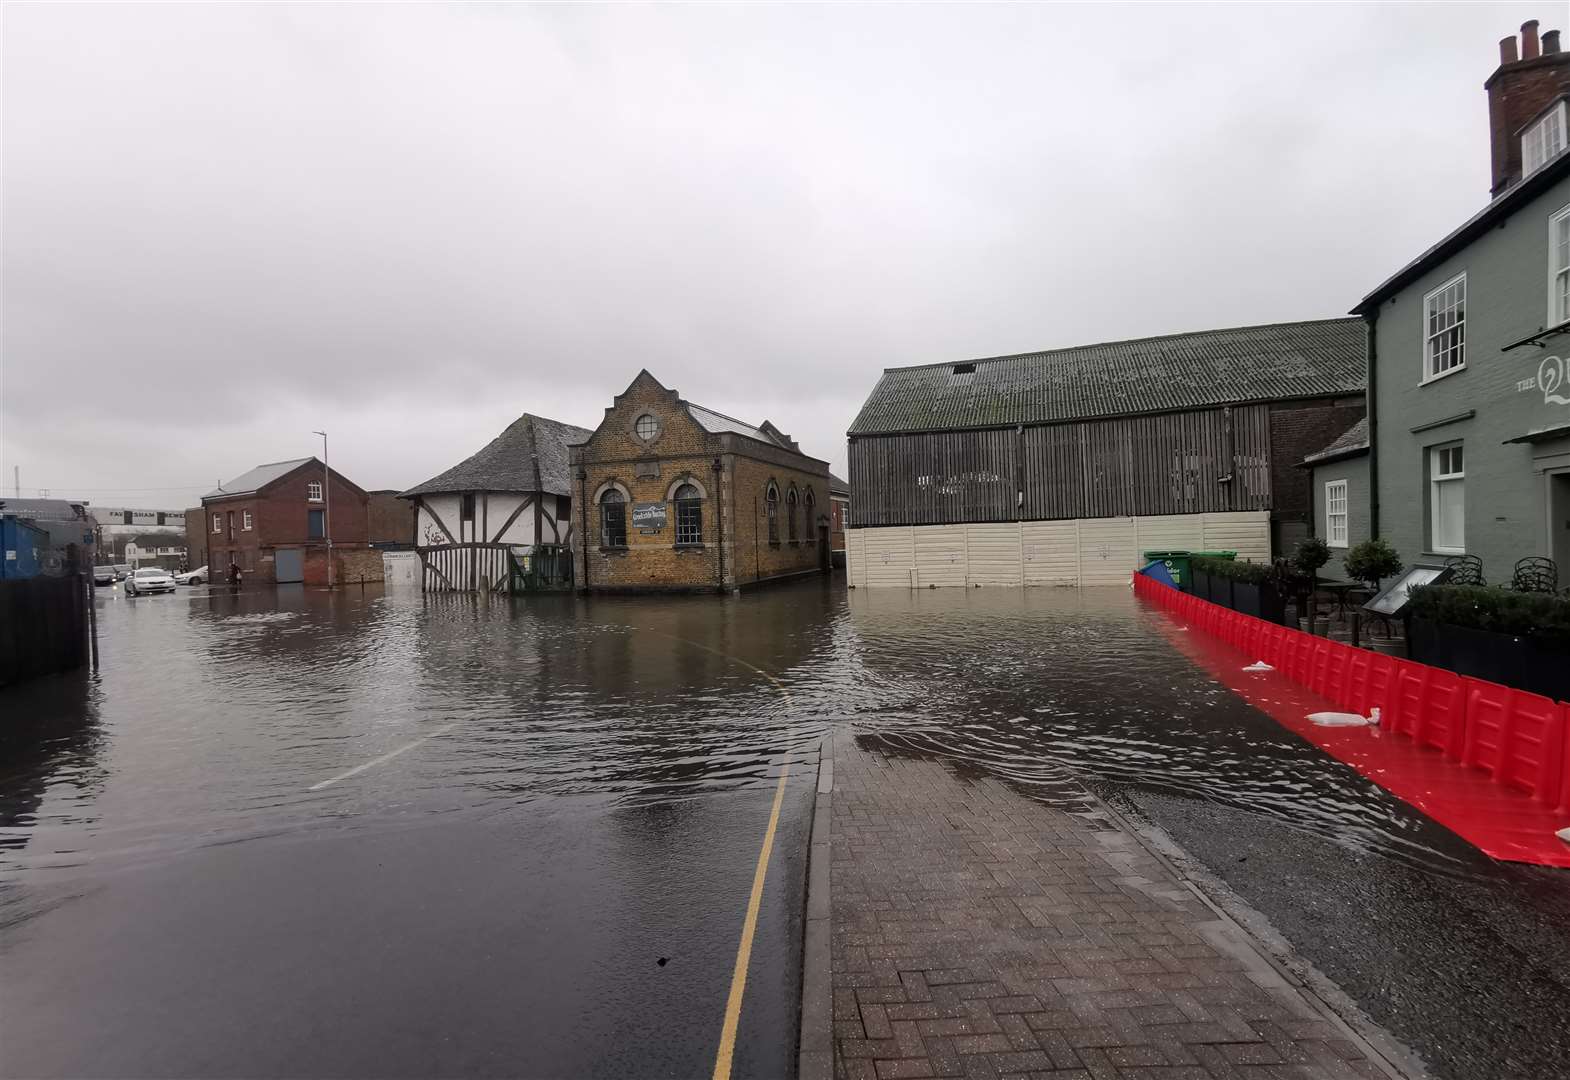 Barriers were placed outside the Quay restaurant in Faversham yesterday